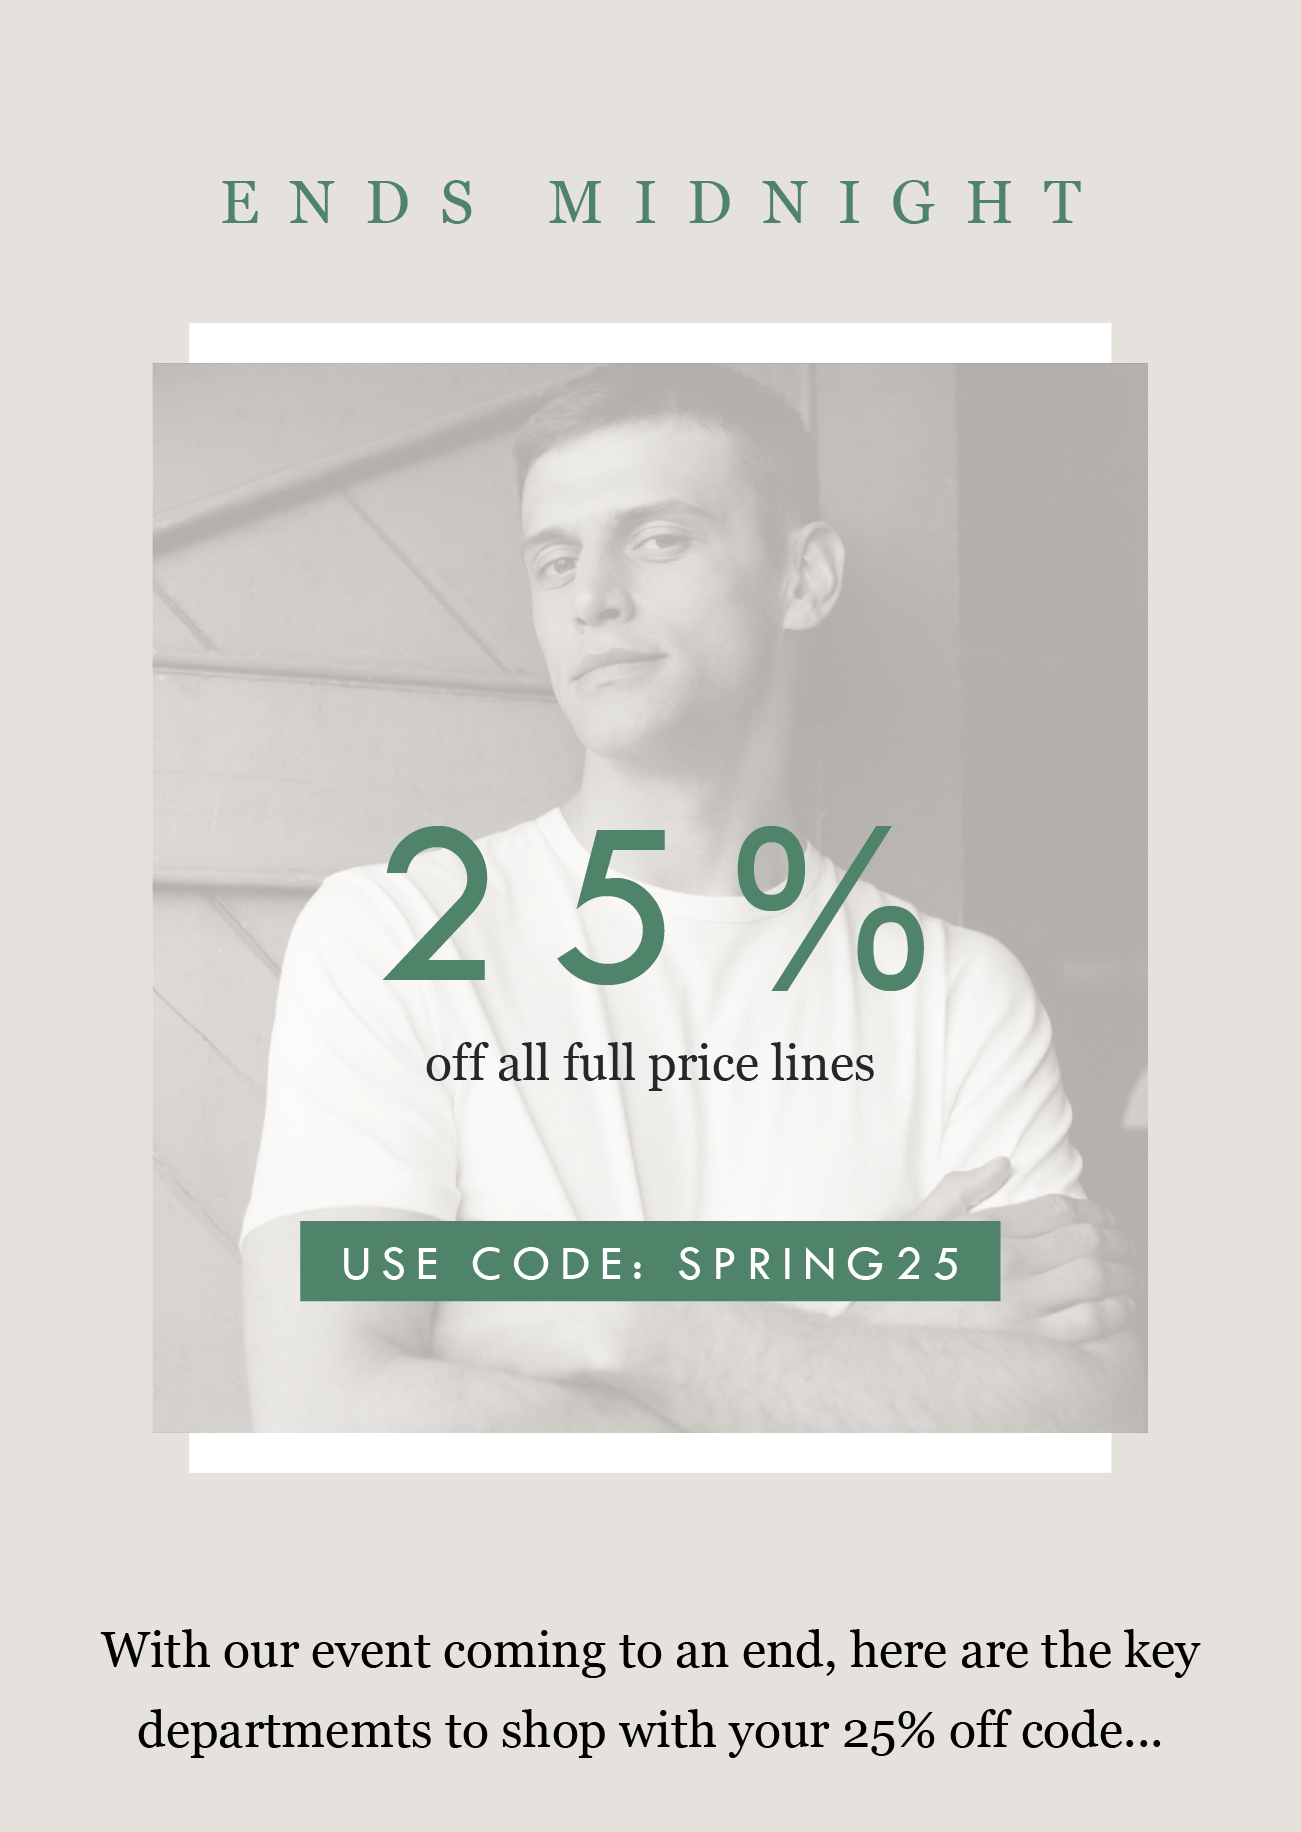 ENDS MIDNIGHT
25%
off all full price products 
USE CODE: SPRING25